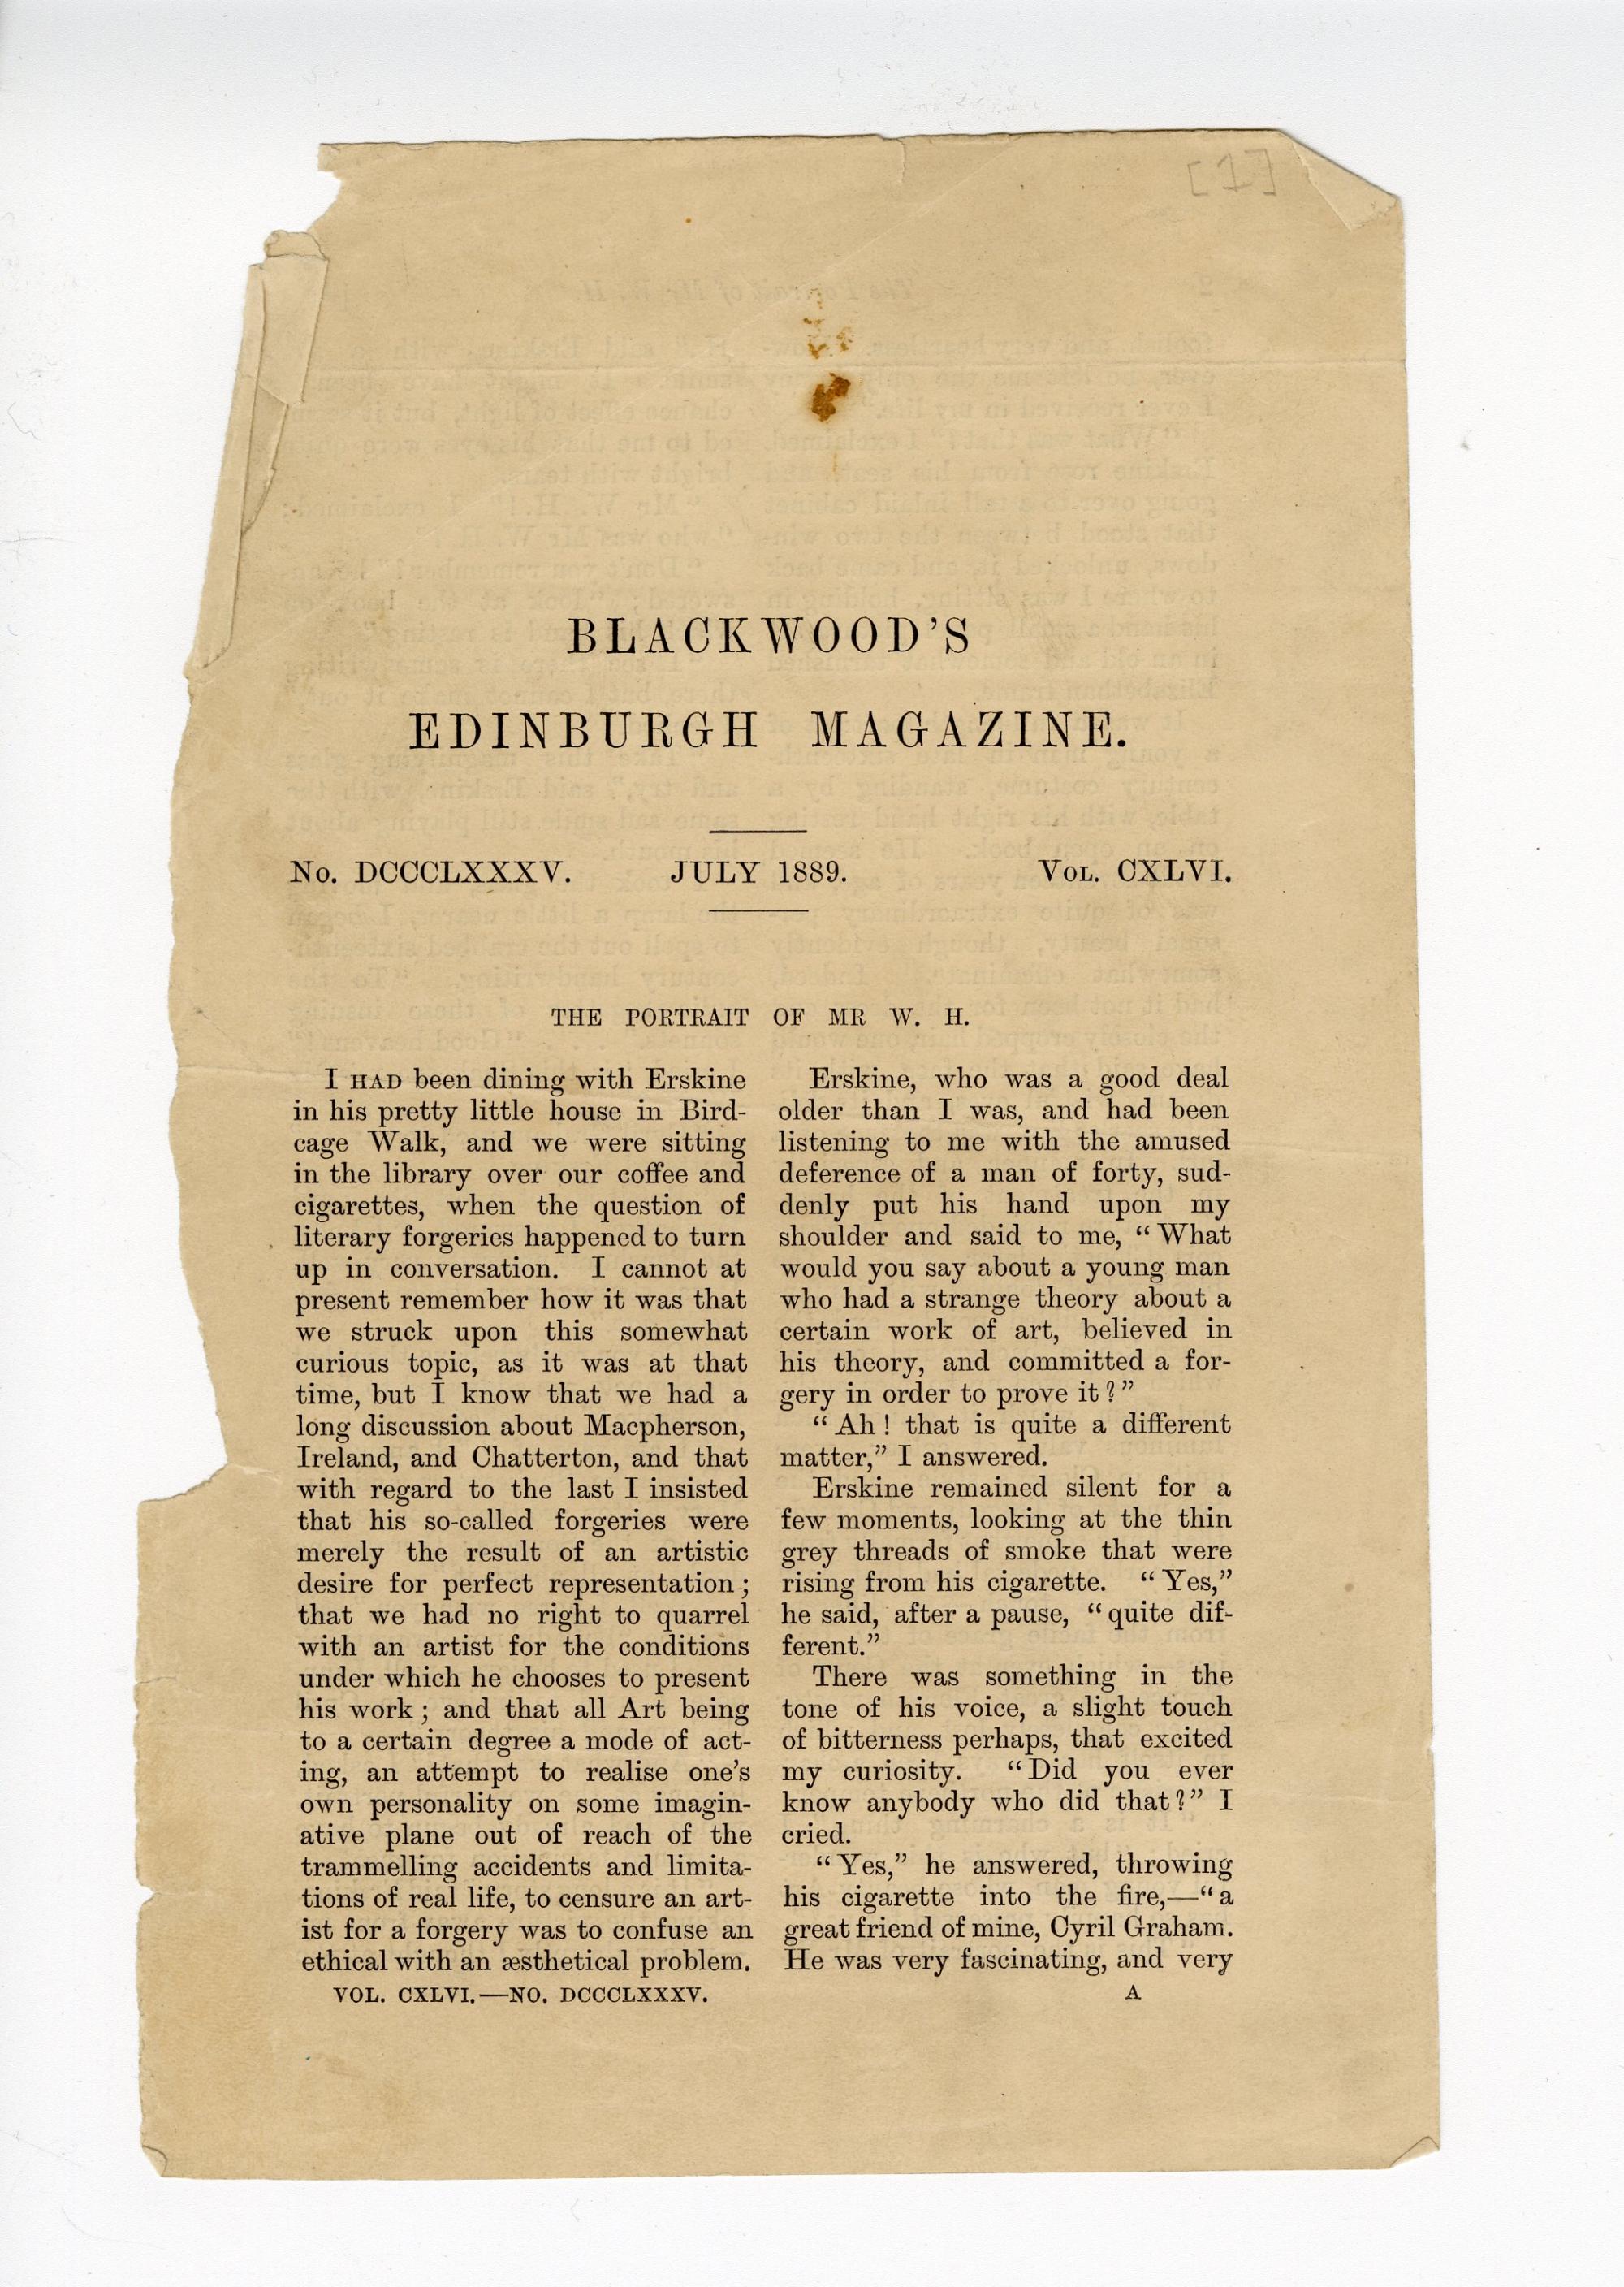 Folio 1 is a loose leaf of the July 1889 printing of the first page of Blackwood's Edinburgh Magazine.  There are no markings on this page except for a number "1" in square brackets in the upper right corner which does not seem to be in Wilde's handwriting. This page is not affixed into notebook in the same manner as other pages from Blackwood's in the manuscript. There is a brown stain on the top center of the page that may resemble the color of the stain on the cutout in folio 15.